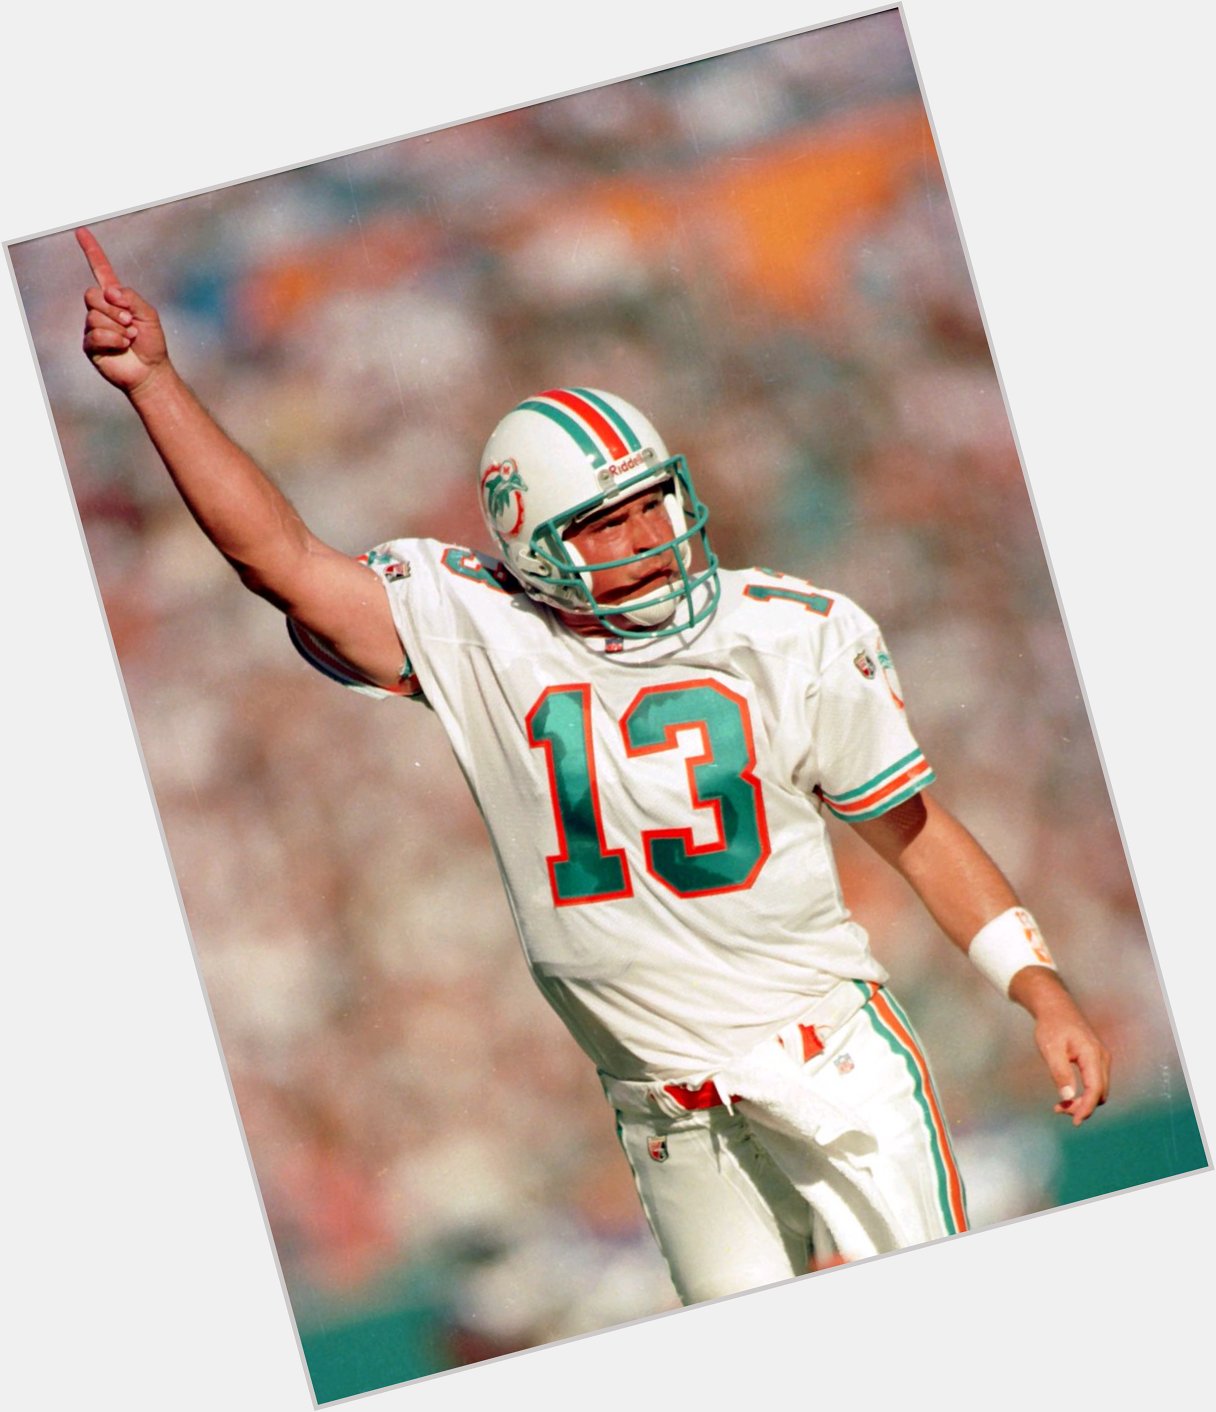 Happy Birthday Dan Marino!!!!   We hope you have the best day ever! 